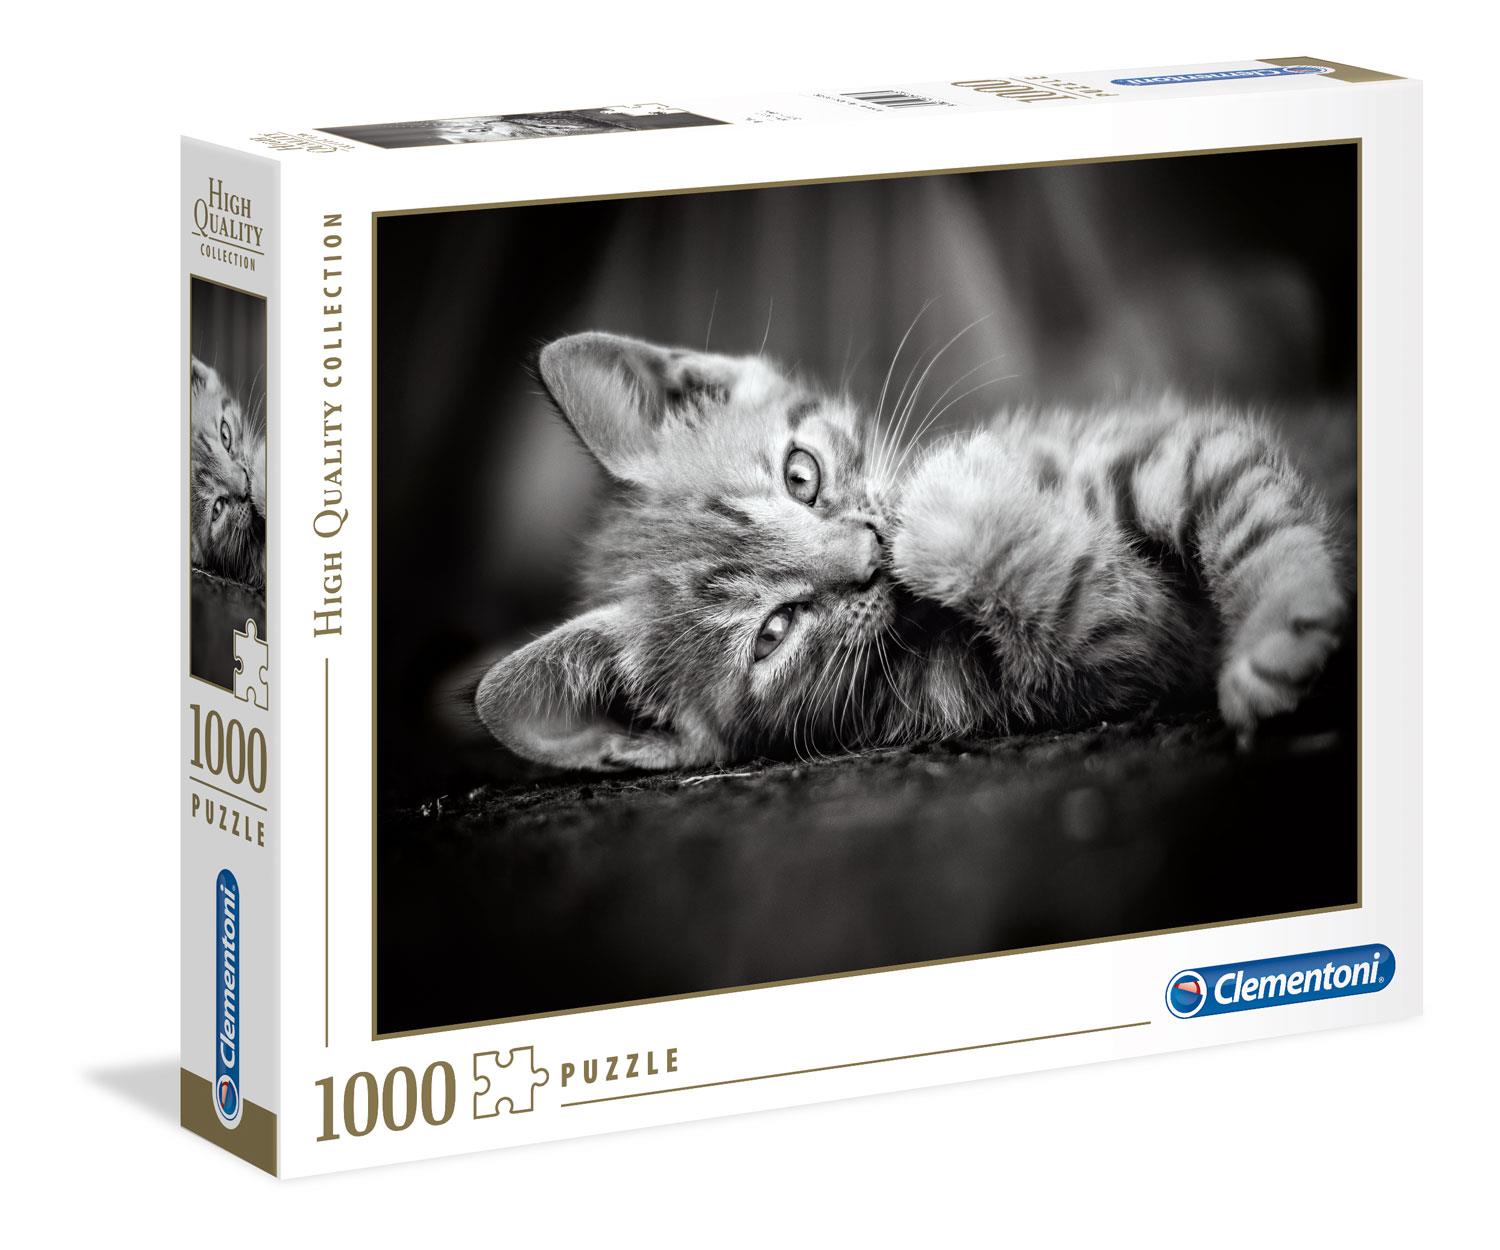 Clementoni Kitty High Quality Jigsaw Puzzle (1000 Pieces)